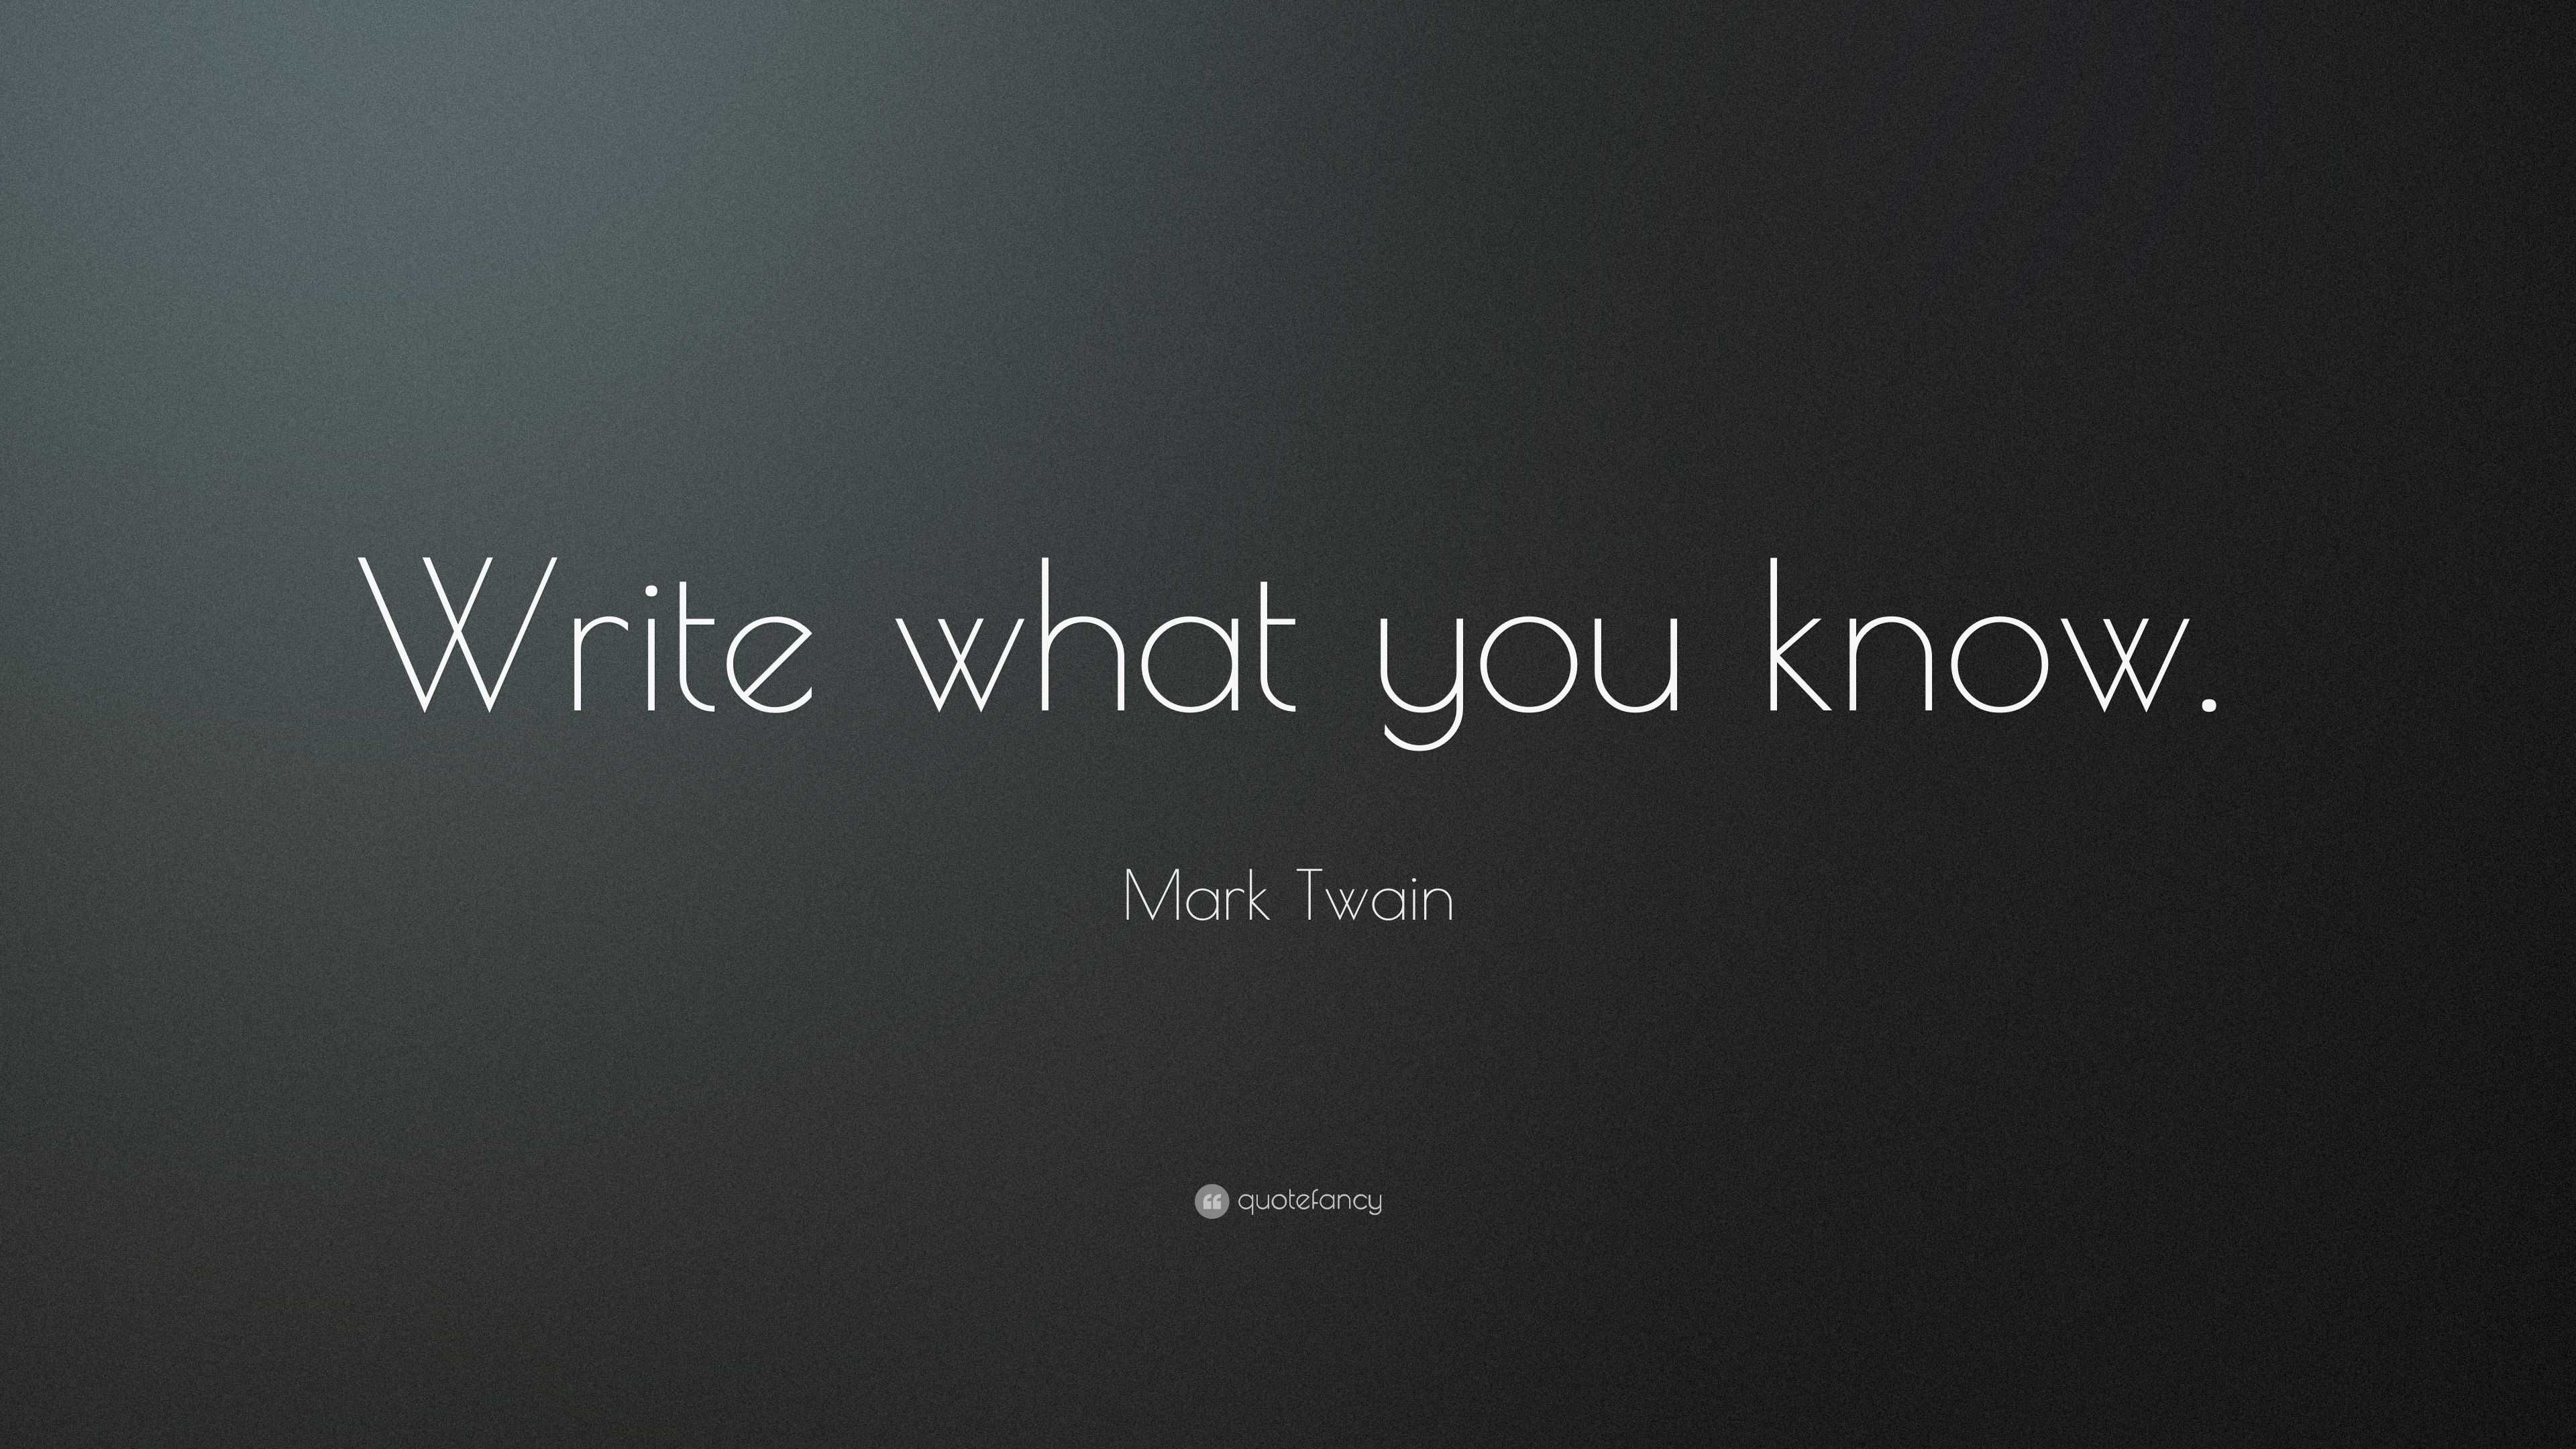 Mark Twain Quote: “Write what you know.” (14 wallpaper)